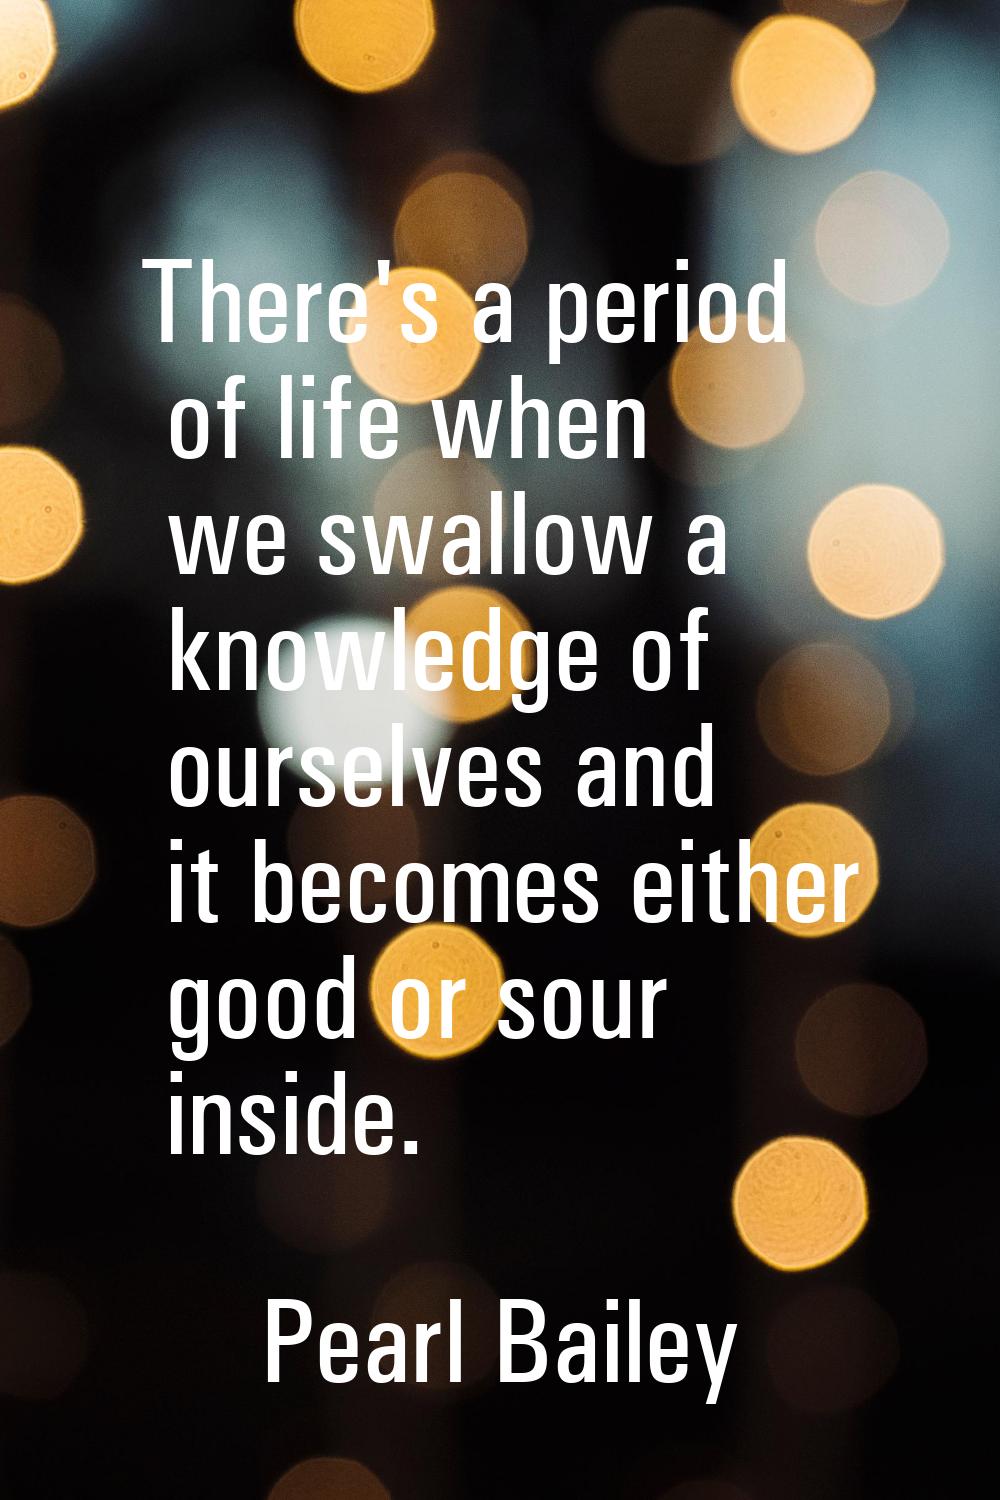 There's a period of life when we swallow a knowledge of ourselves and it becomes either good or sou